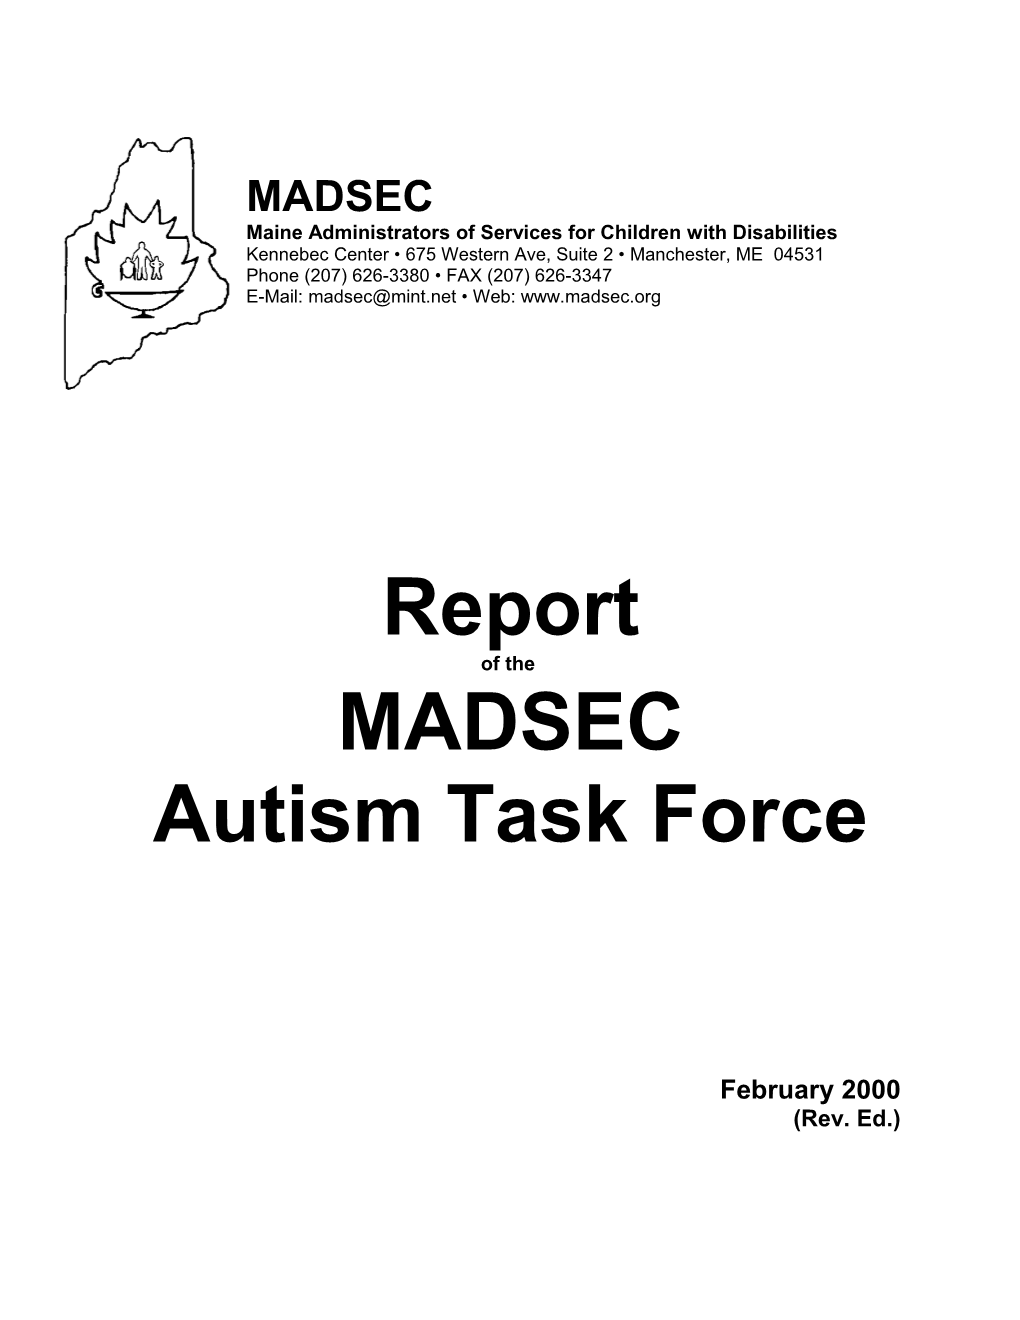 Maine Administrators of Services for Children with Disabilities